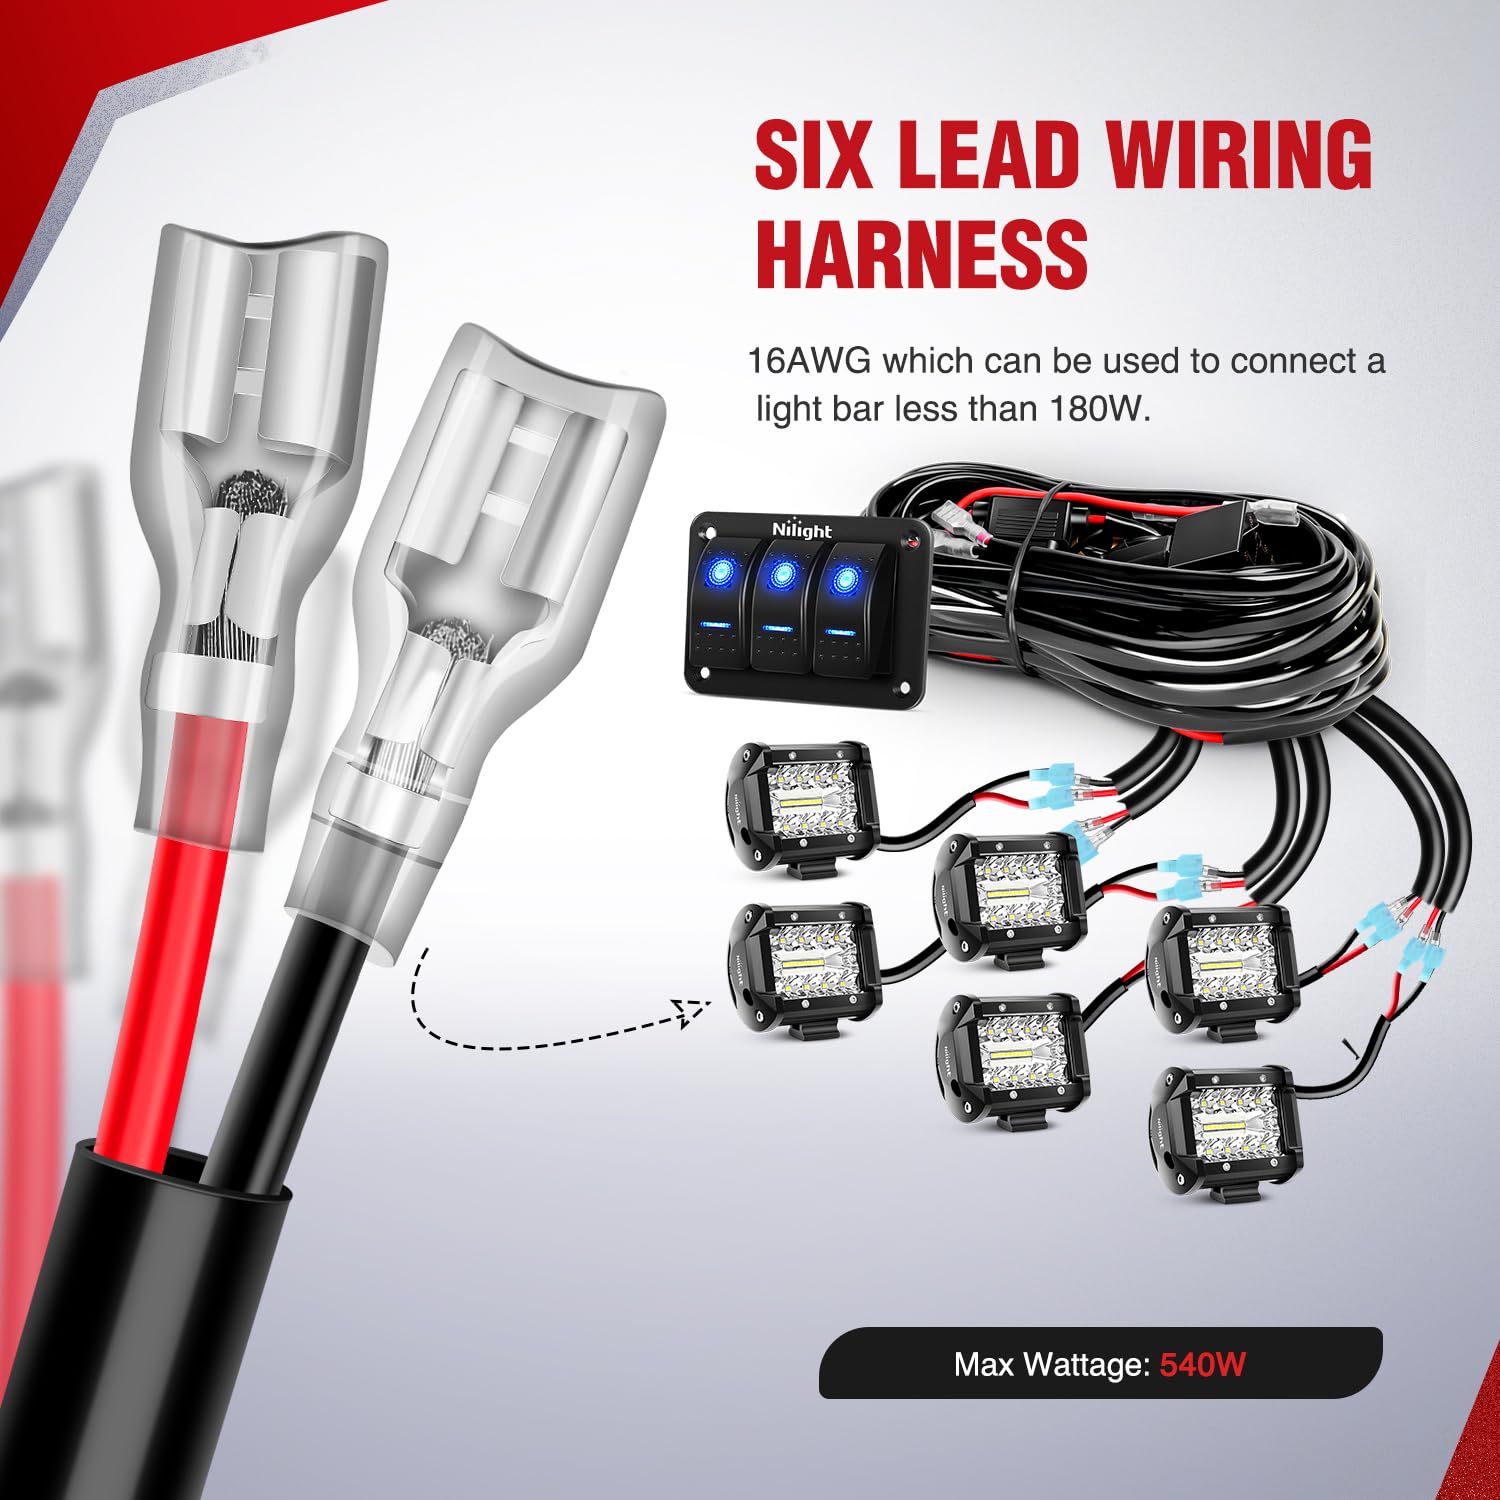 16AWG Wire Harness 6 Leads W/ 3 Gang Rocker Switch | 9 Fuses | 12 Spade Connectors Nilight